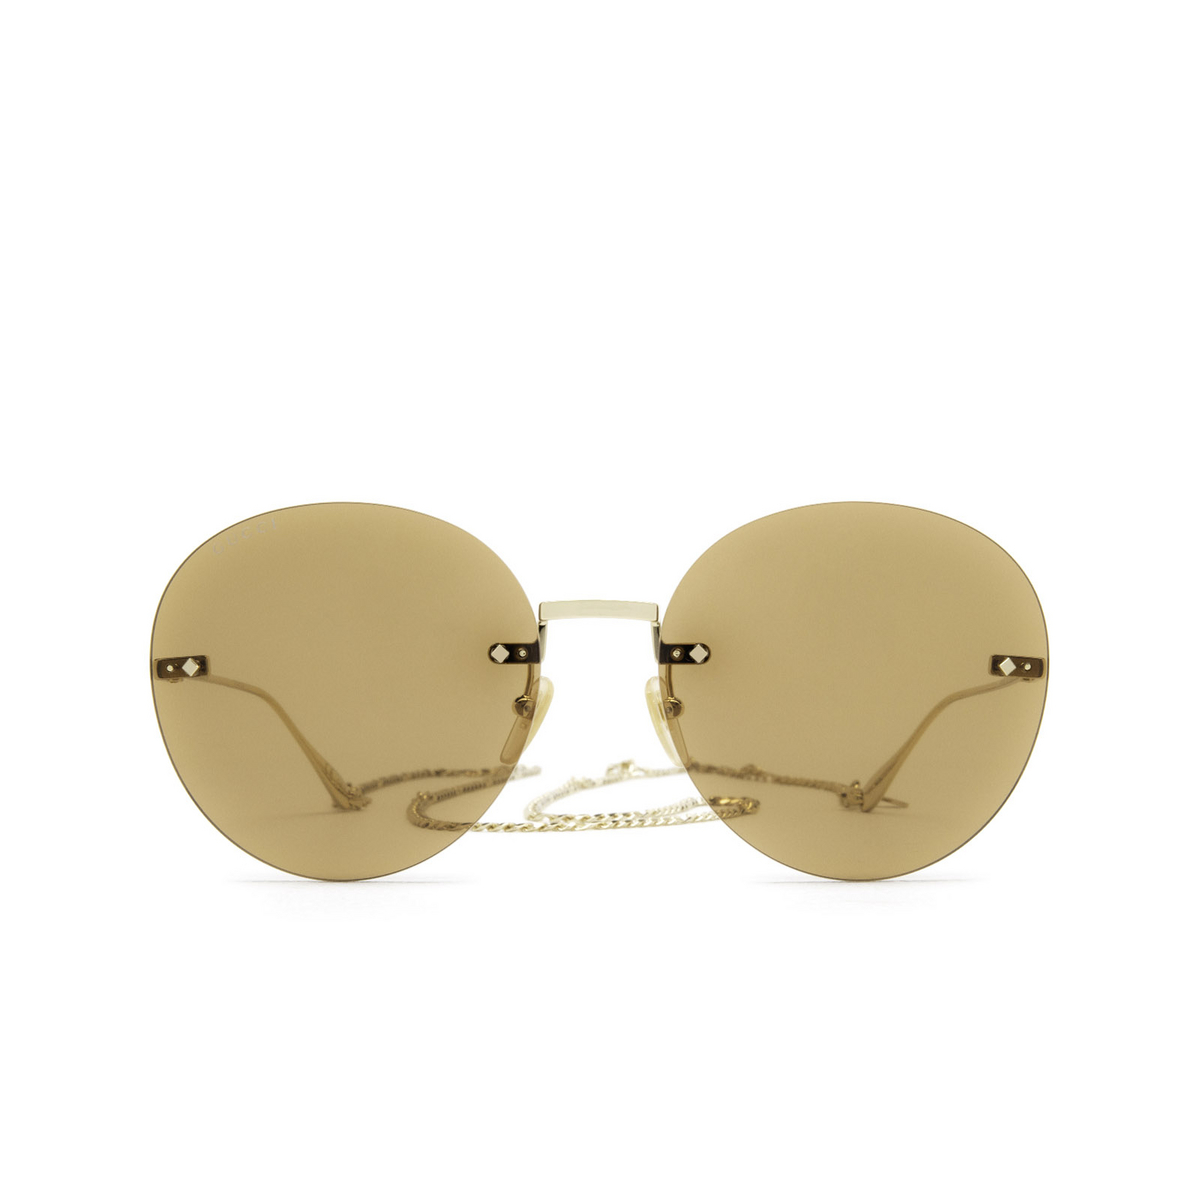 Gucci® Round Sunglasses: GG1149S color Gold 003 - front view.